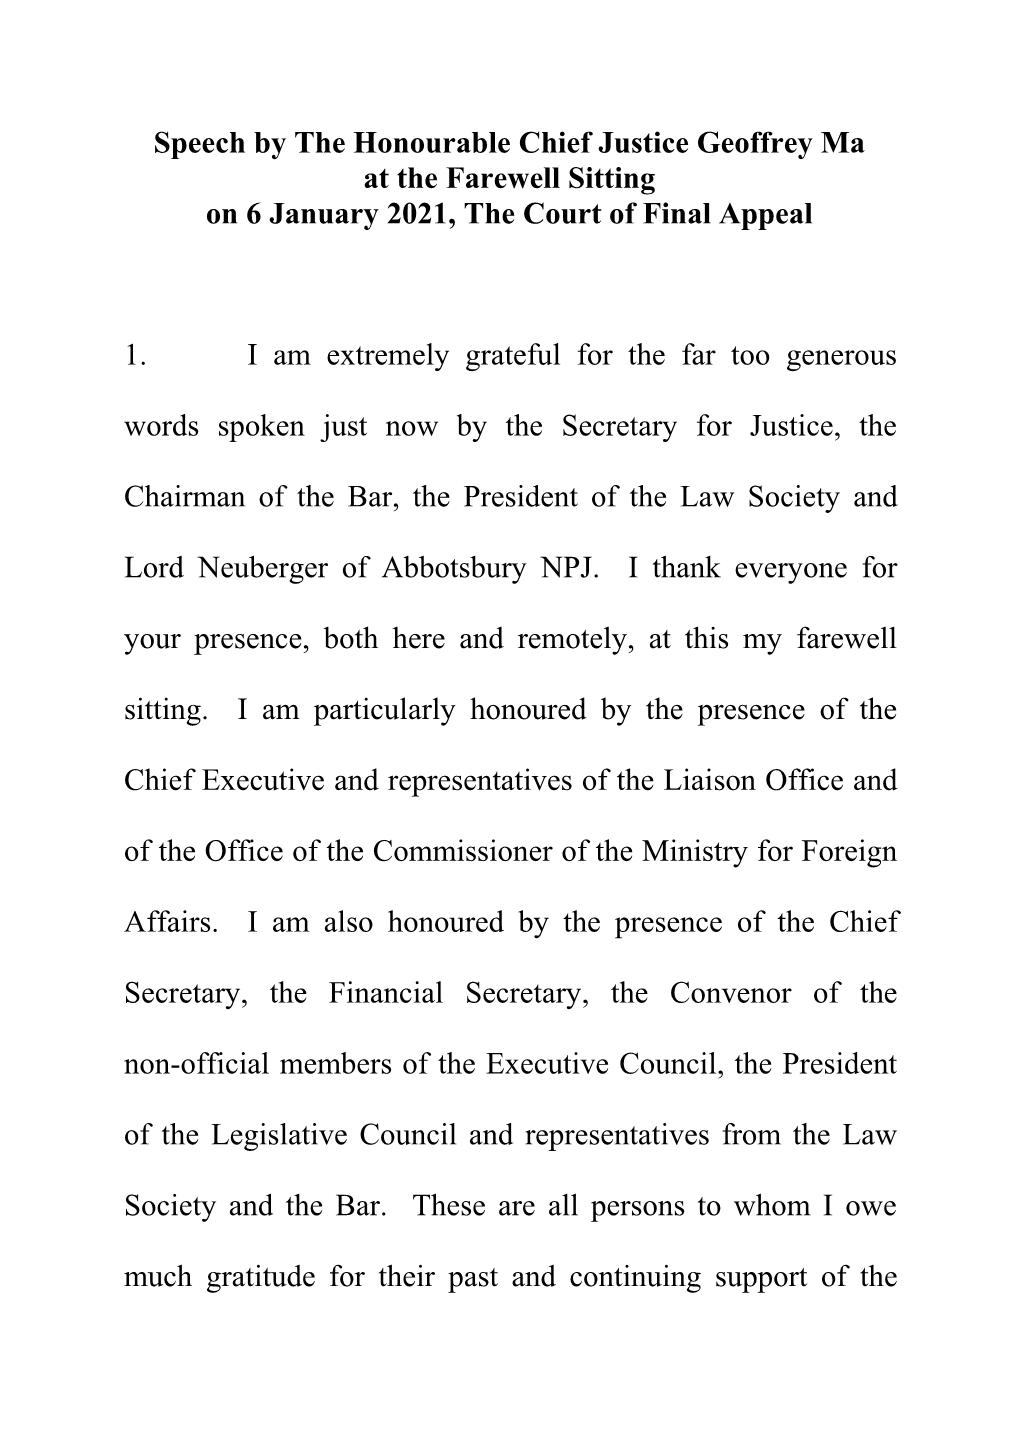 Speech by the Honourable Chief Justice Geoffrey Ma at the Farewell Sitting on 6 January 2021, the Court of Final Appeal